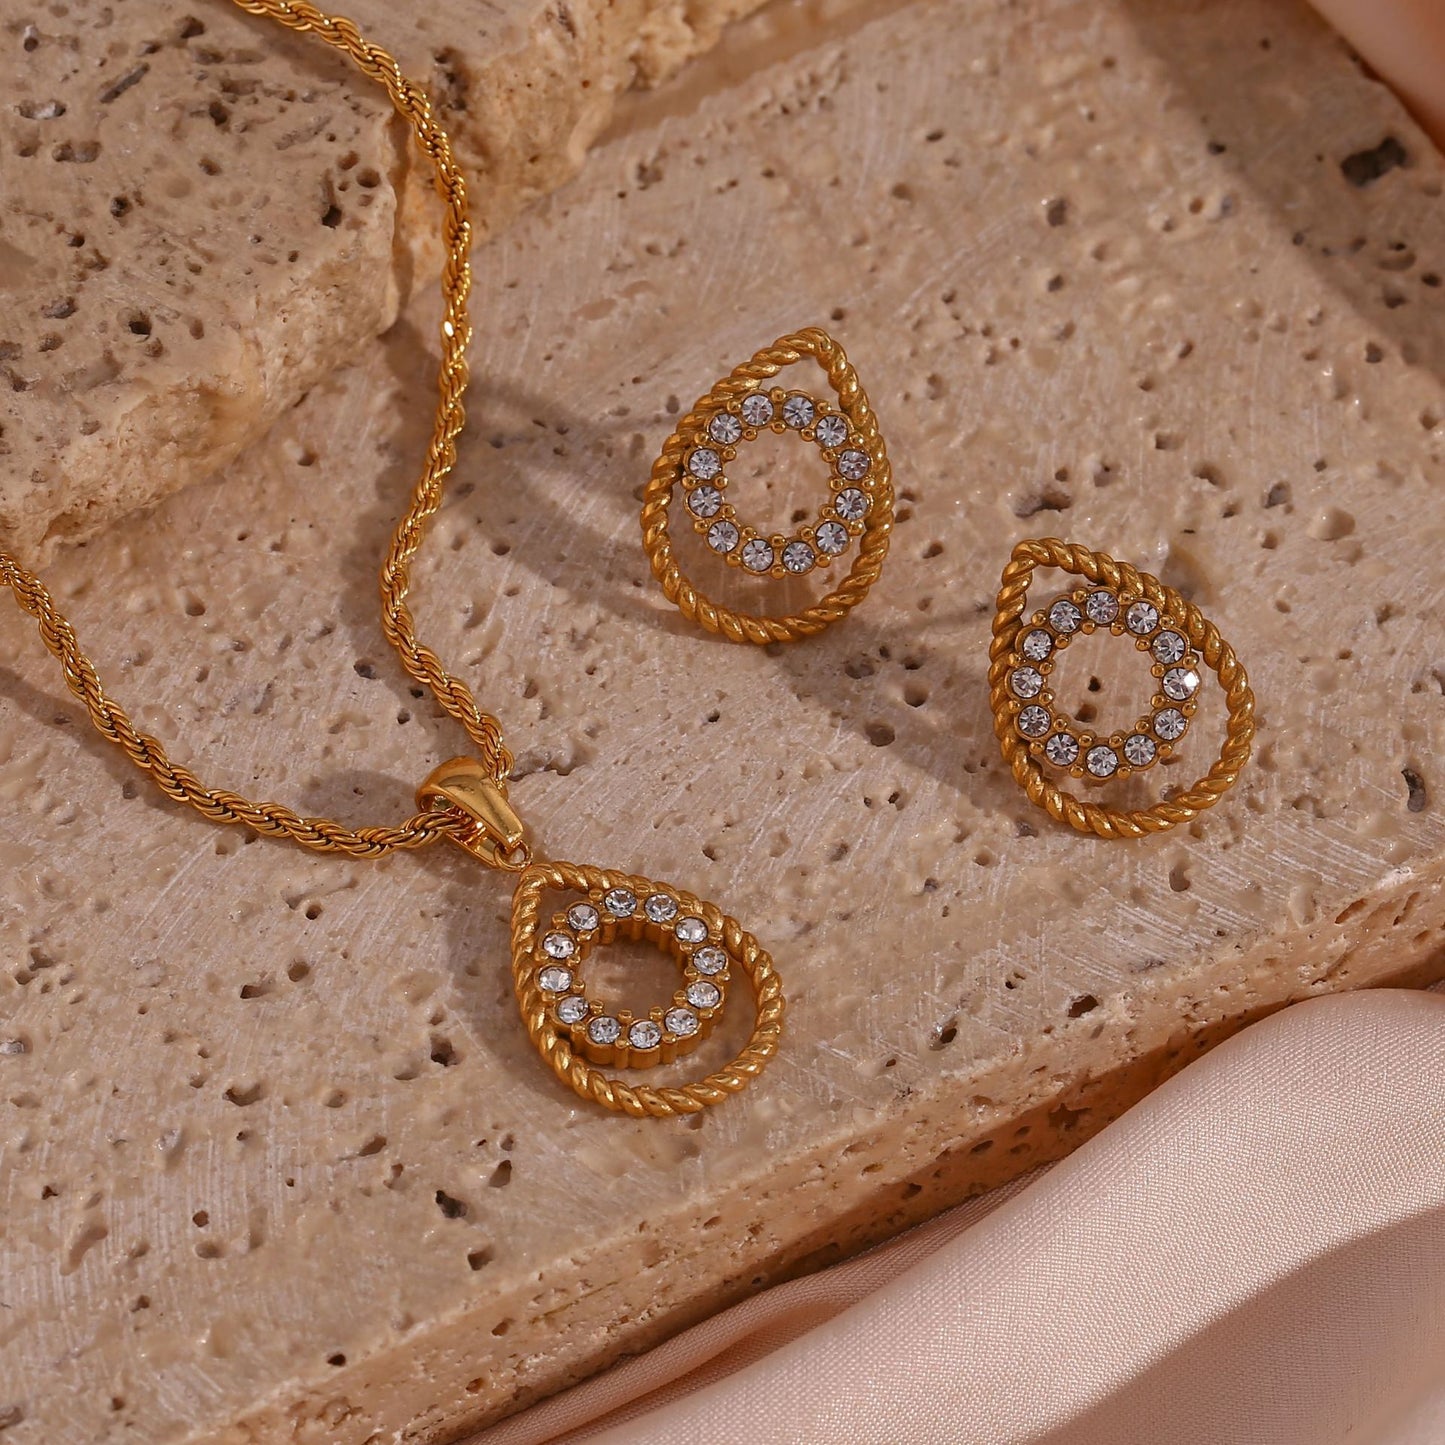 Finely inlaid ear studs with golden hollow water drop pendant necklace